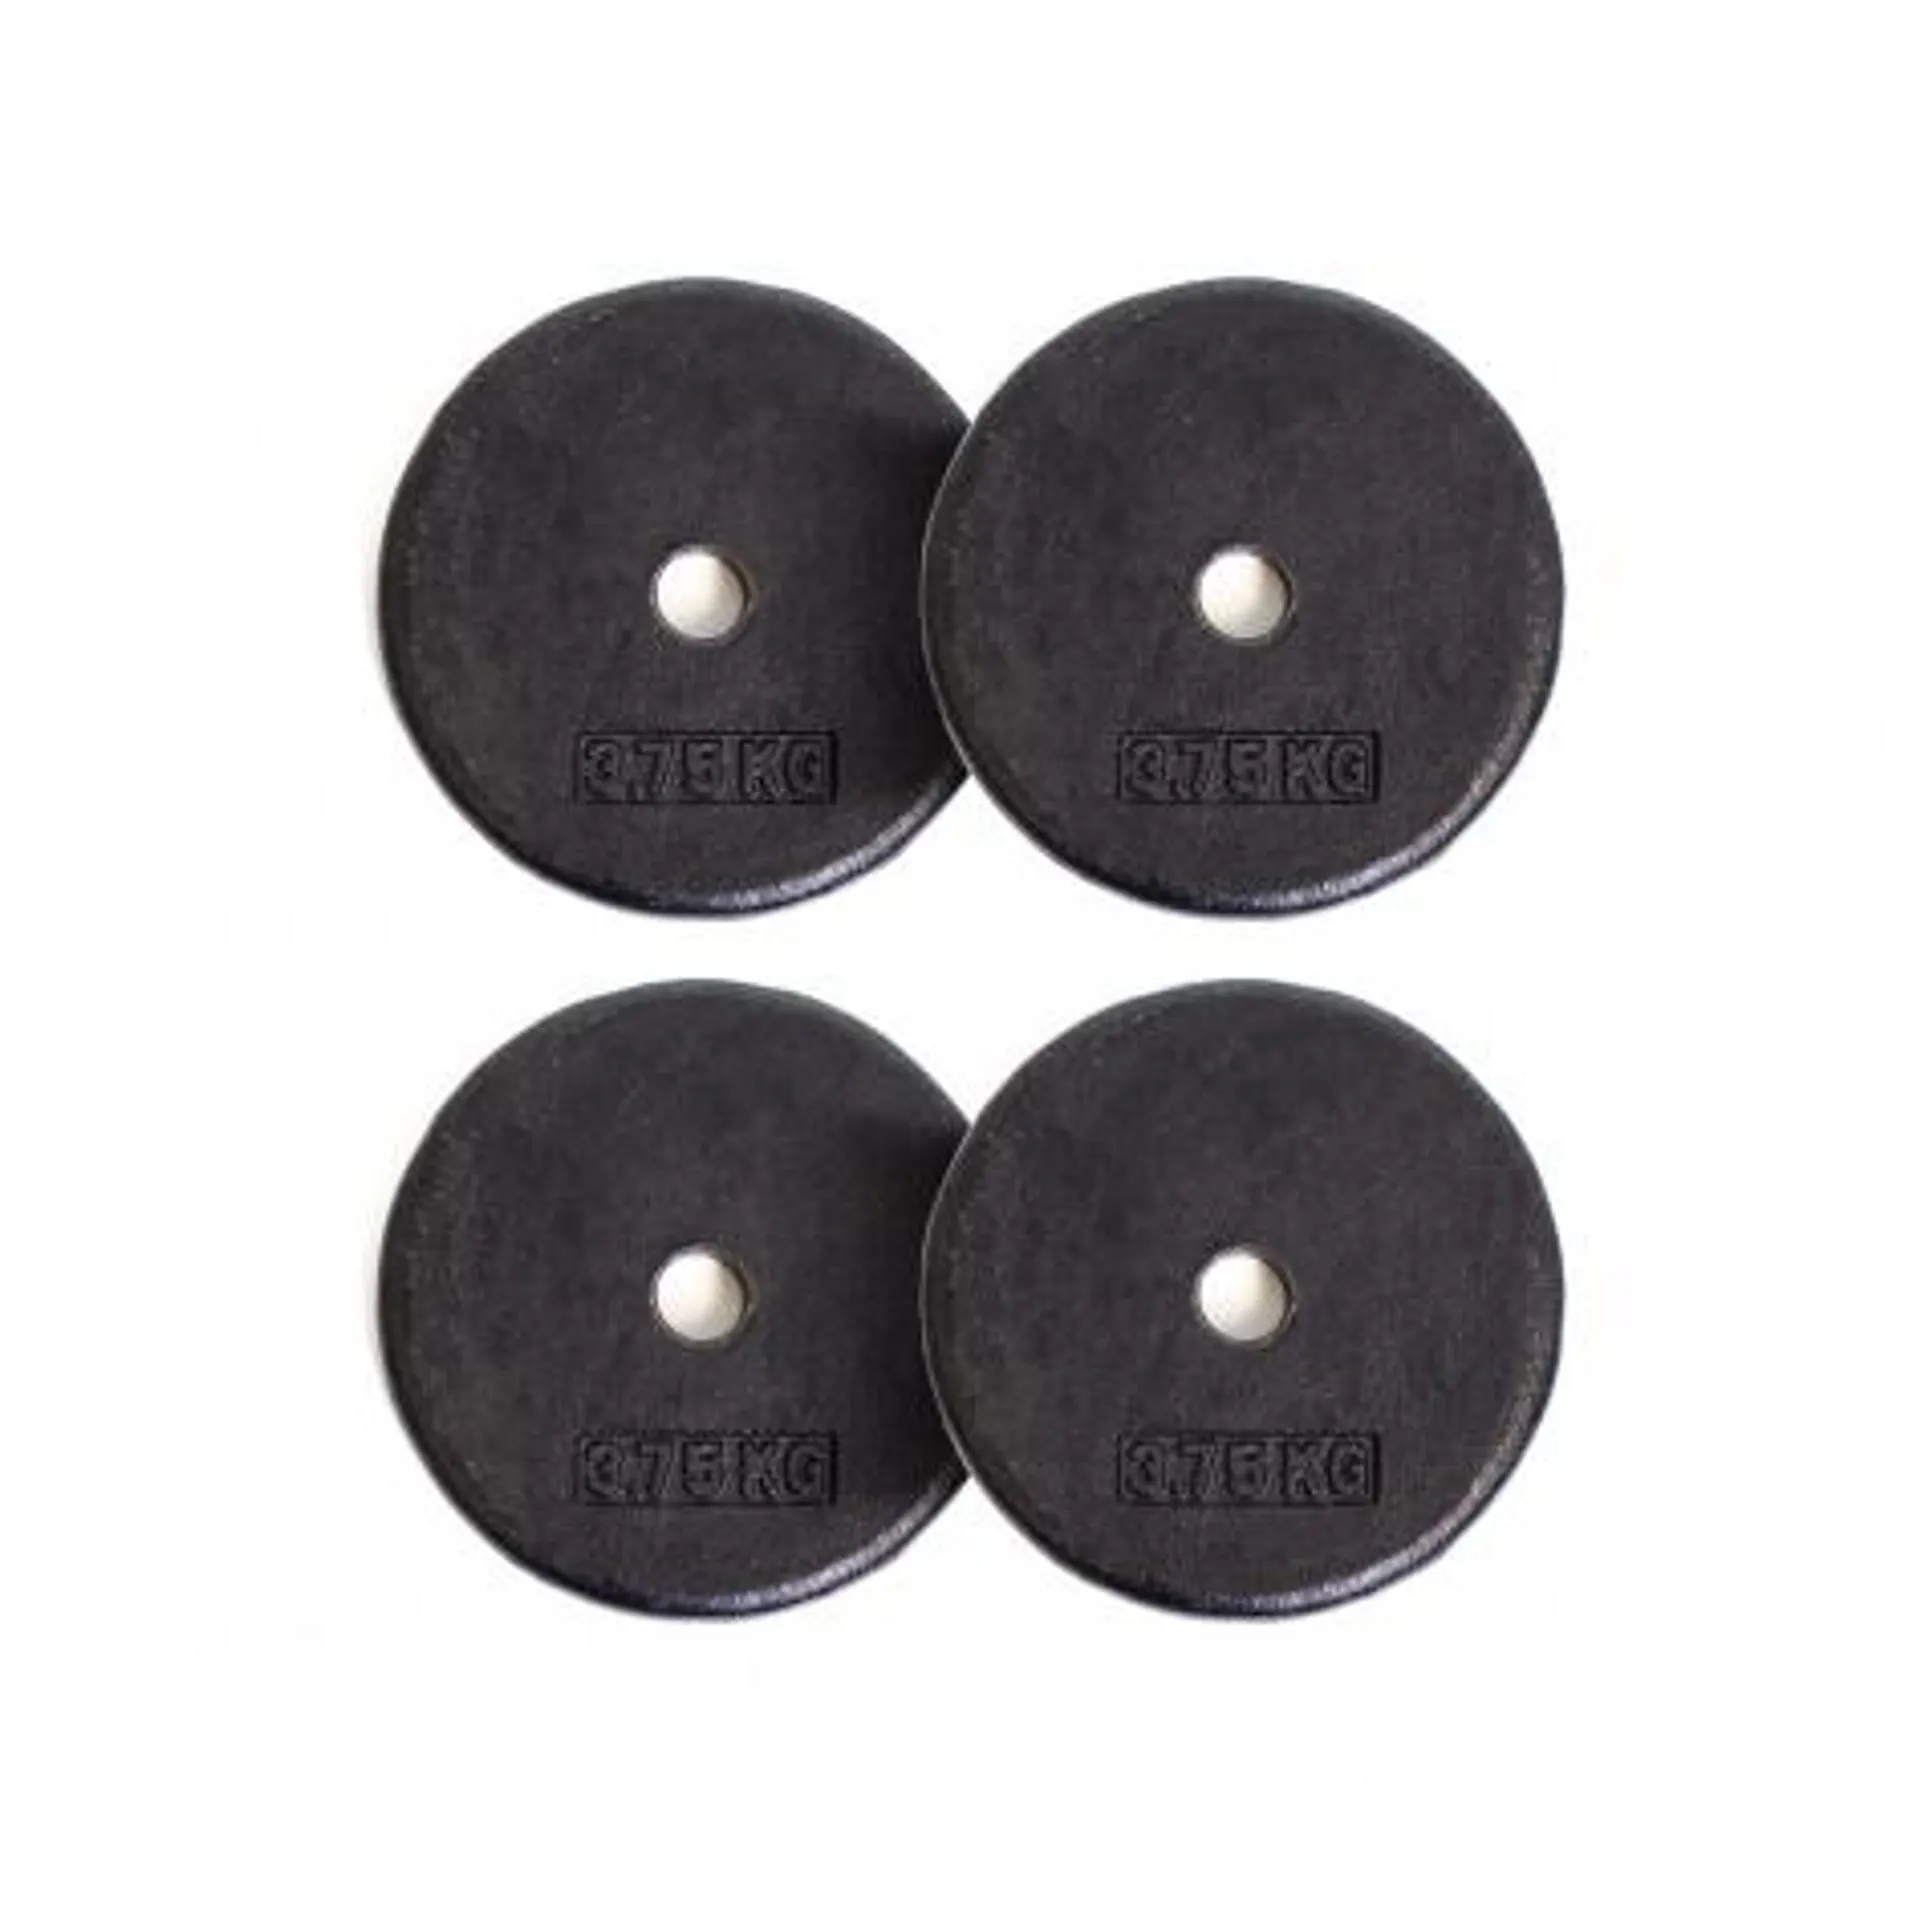 Body Power 3.75Kg Pro-Style Standard Weight plates (x4)